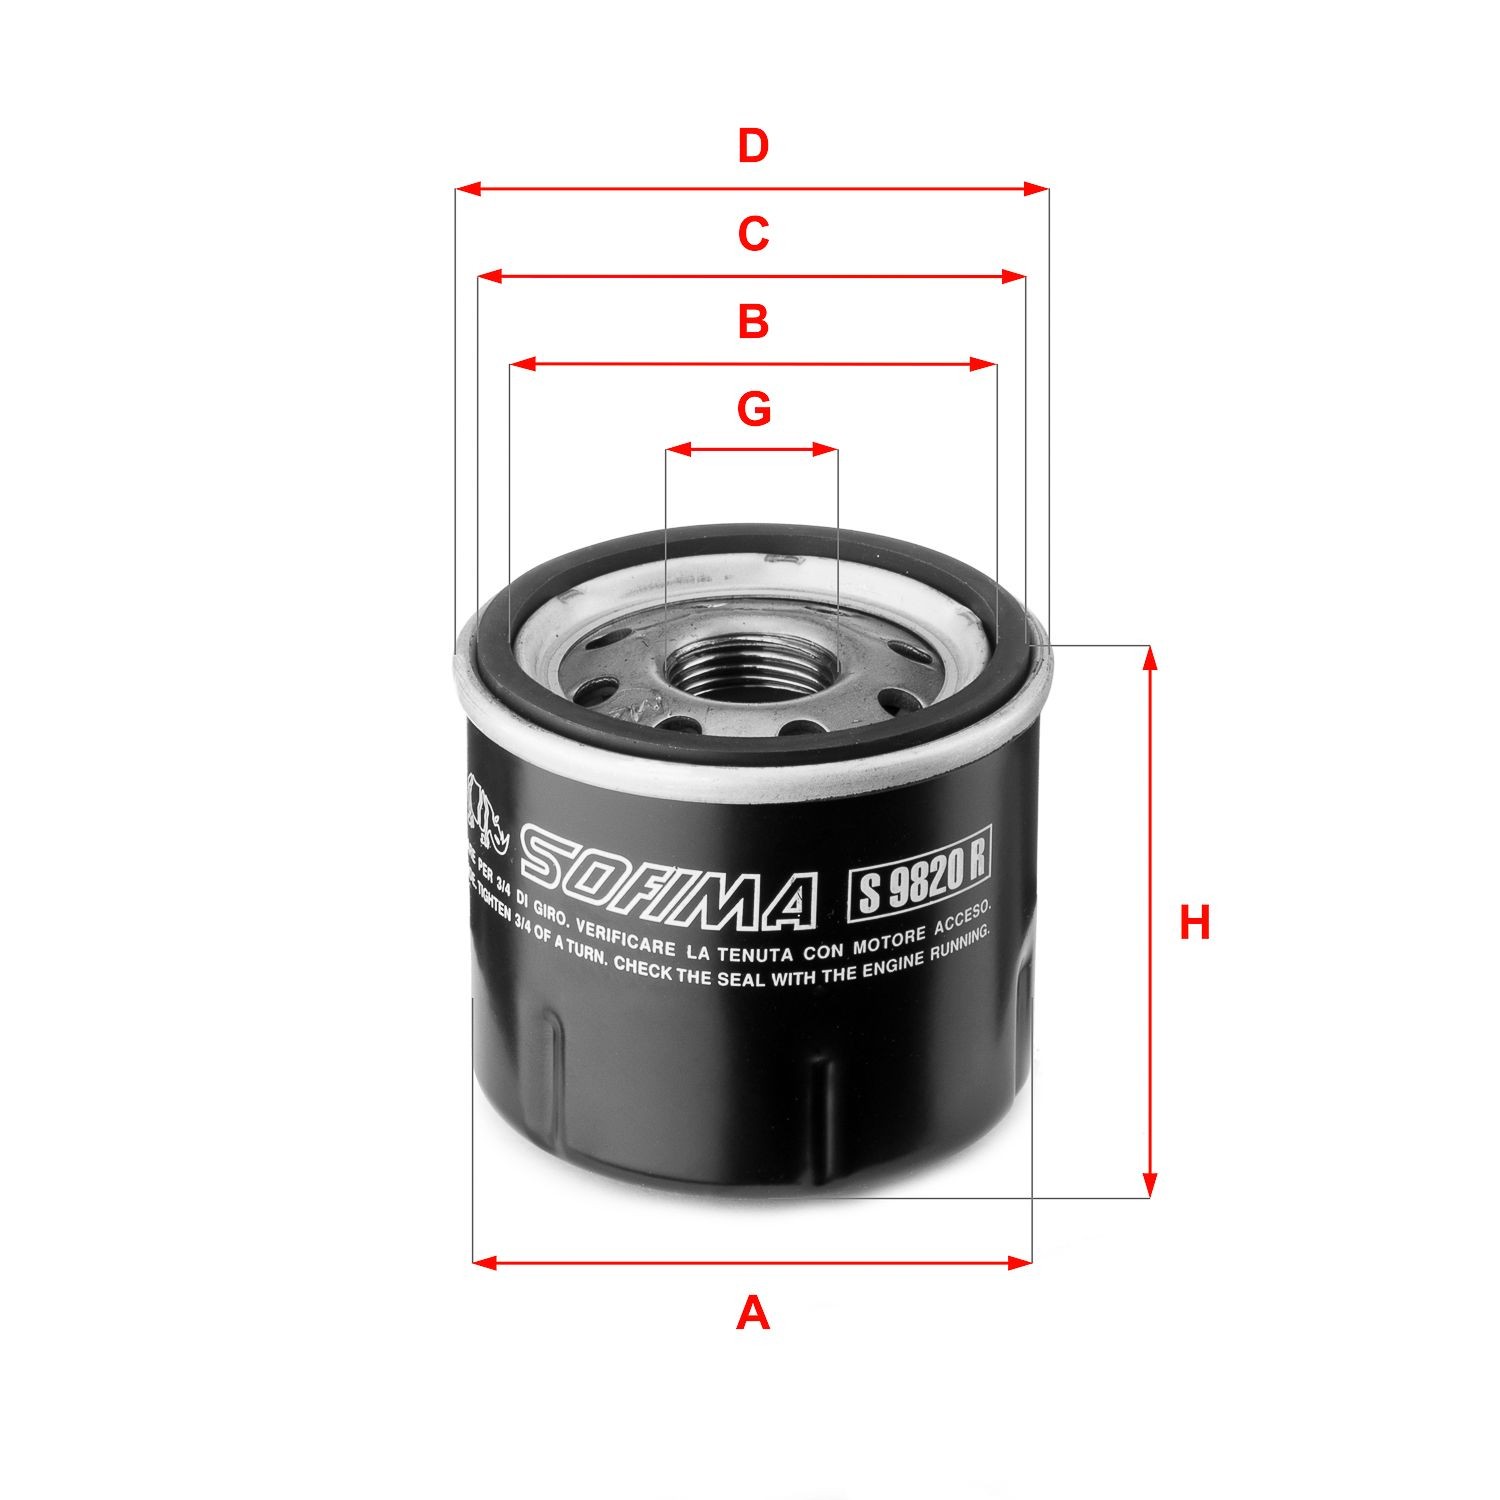 SOFIMA S 9820 R Oil filter M 20 X 1,5, Spin-on Filter